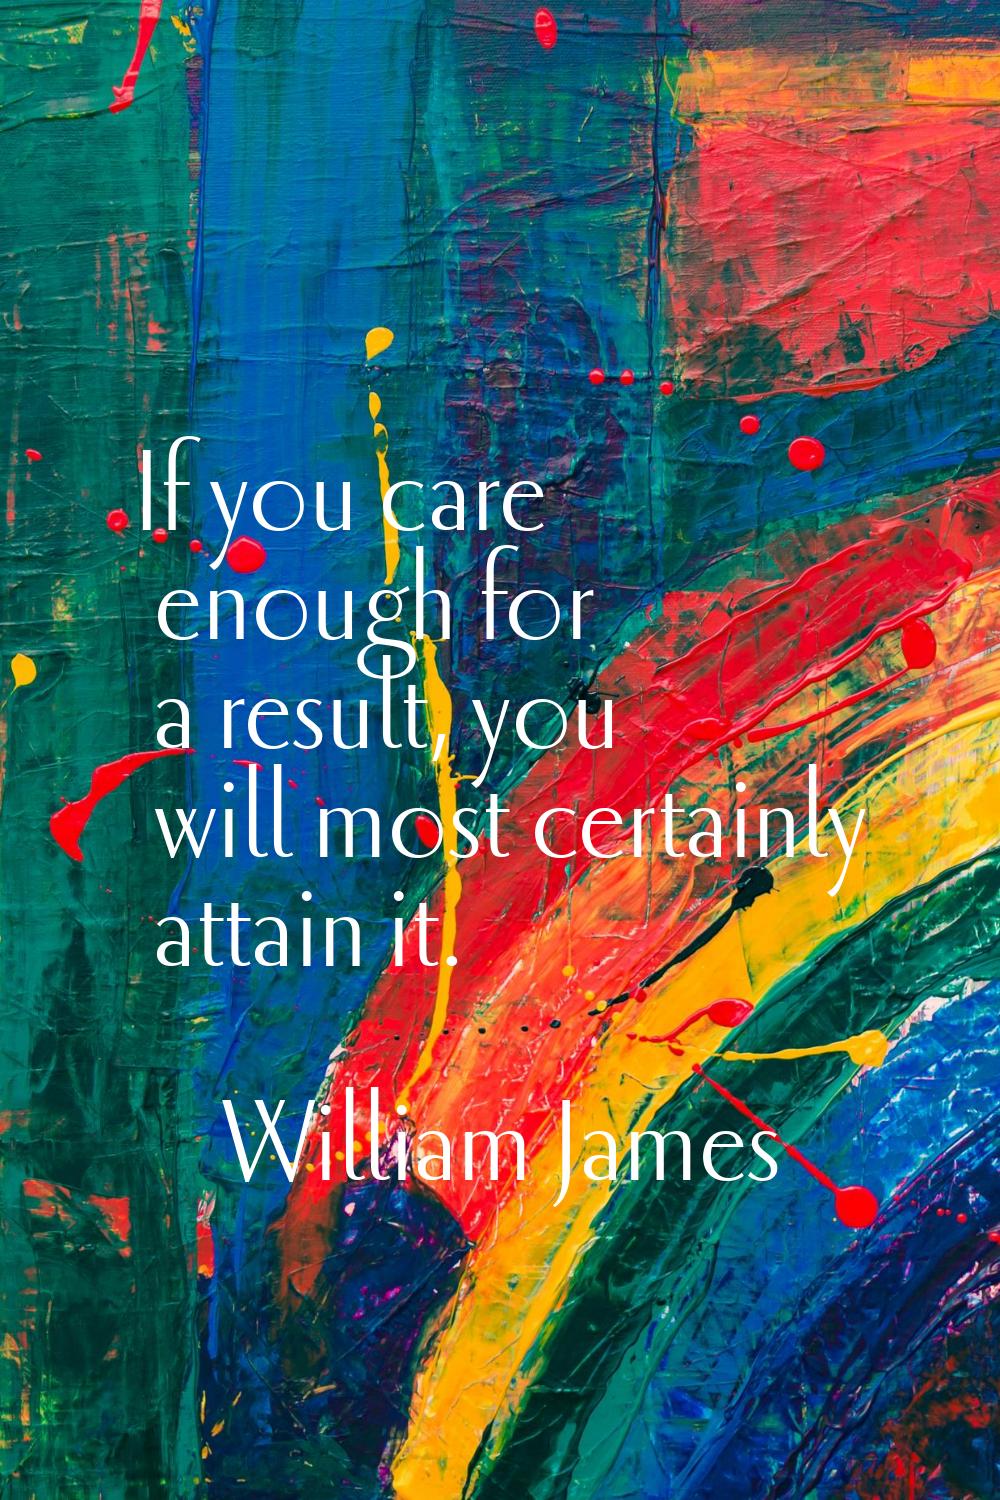 If you care enough for a result, you will most certainly attain it.